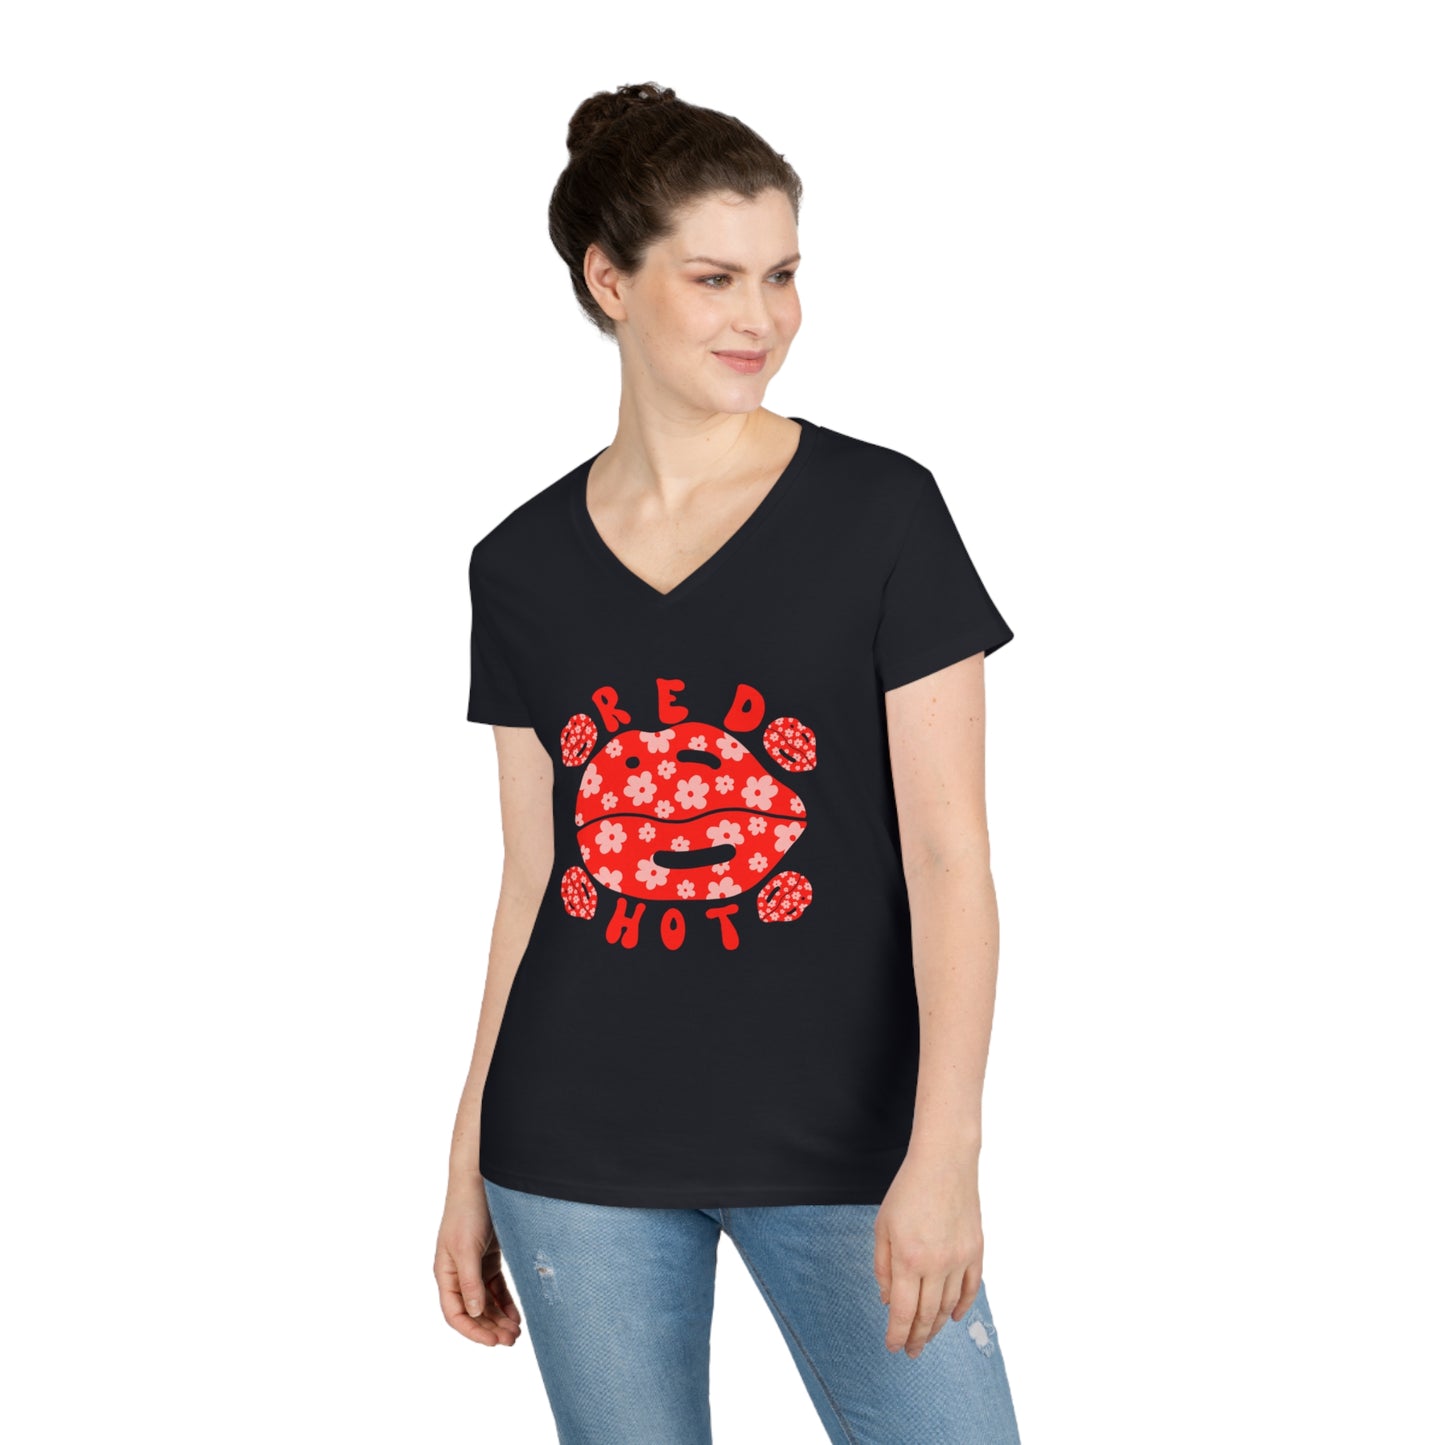 Red Hot Lips Ladies' Cotton V-Neck T-Shirt